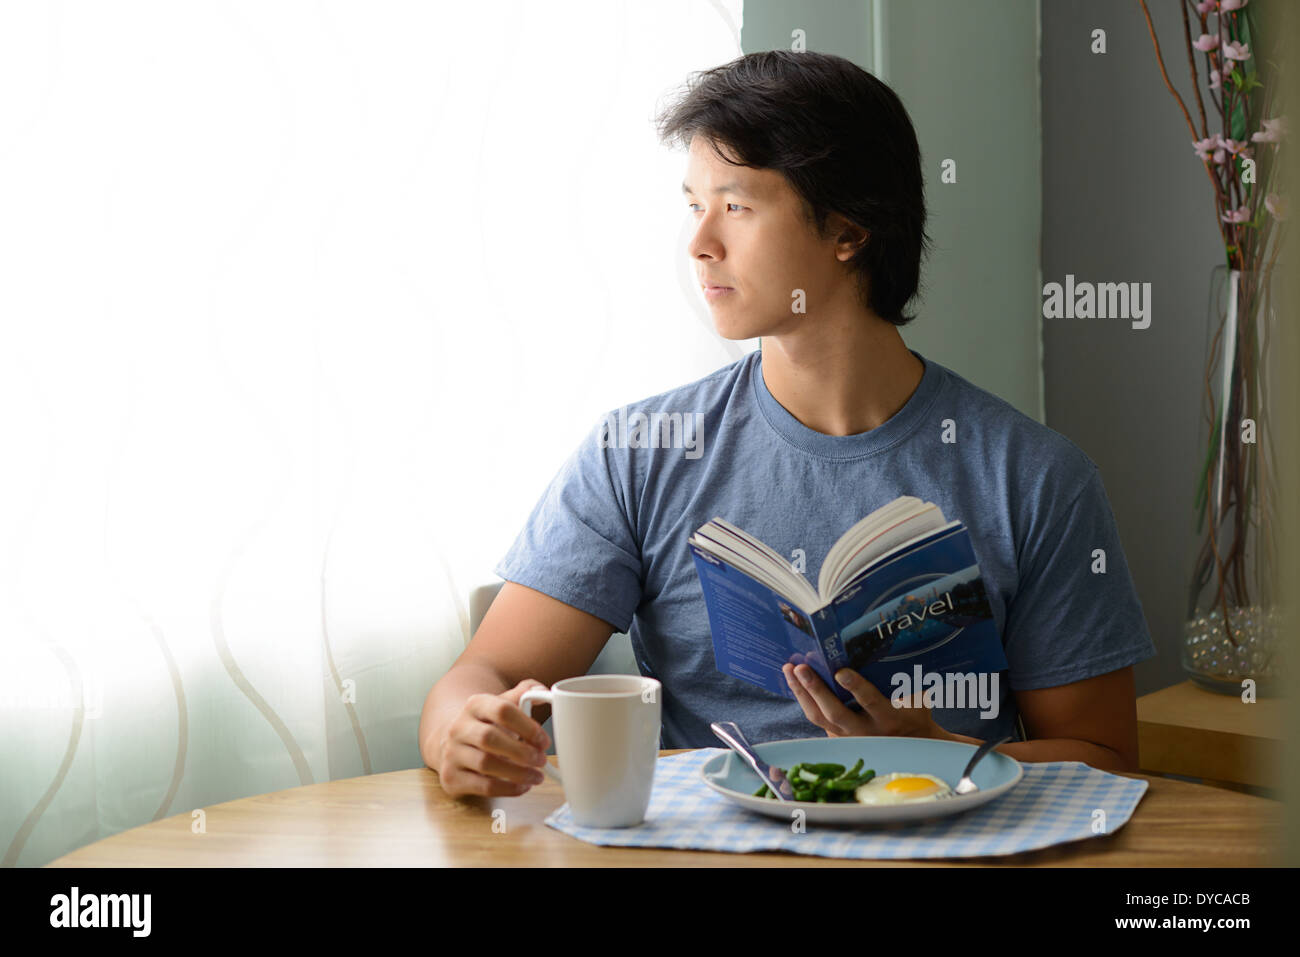 Asian man holding a book having breakfast, sitting and looking out the window daydreaming, thinking. Stock Photo